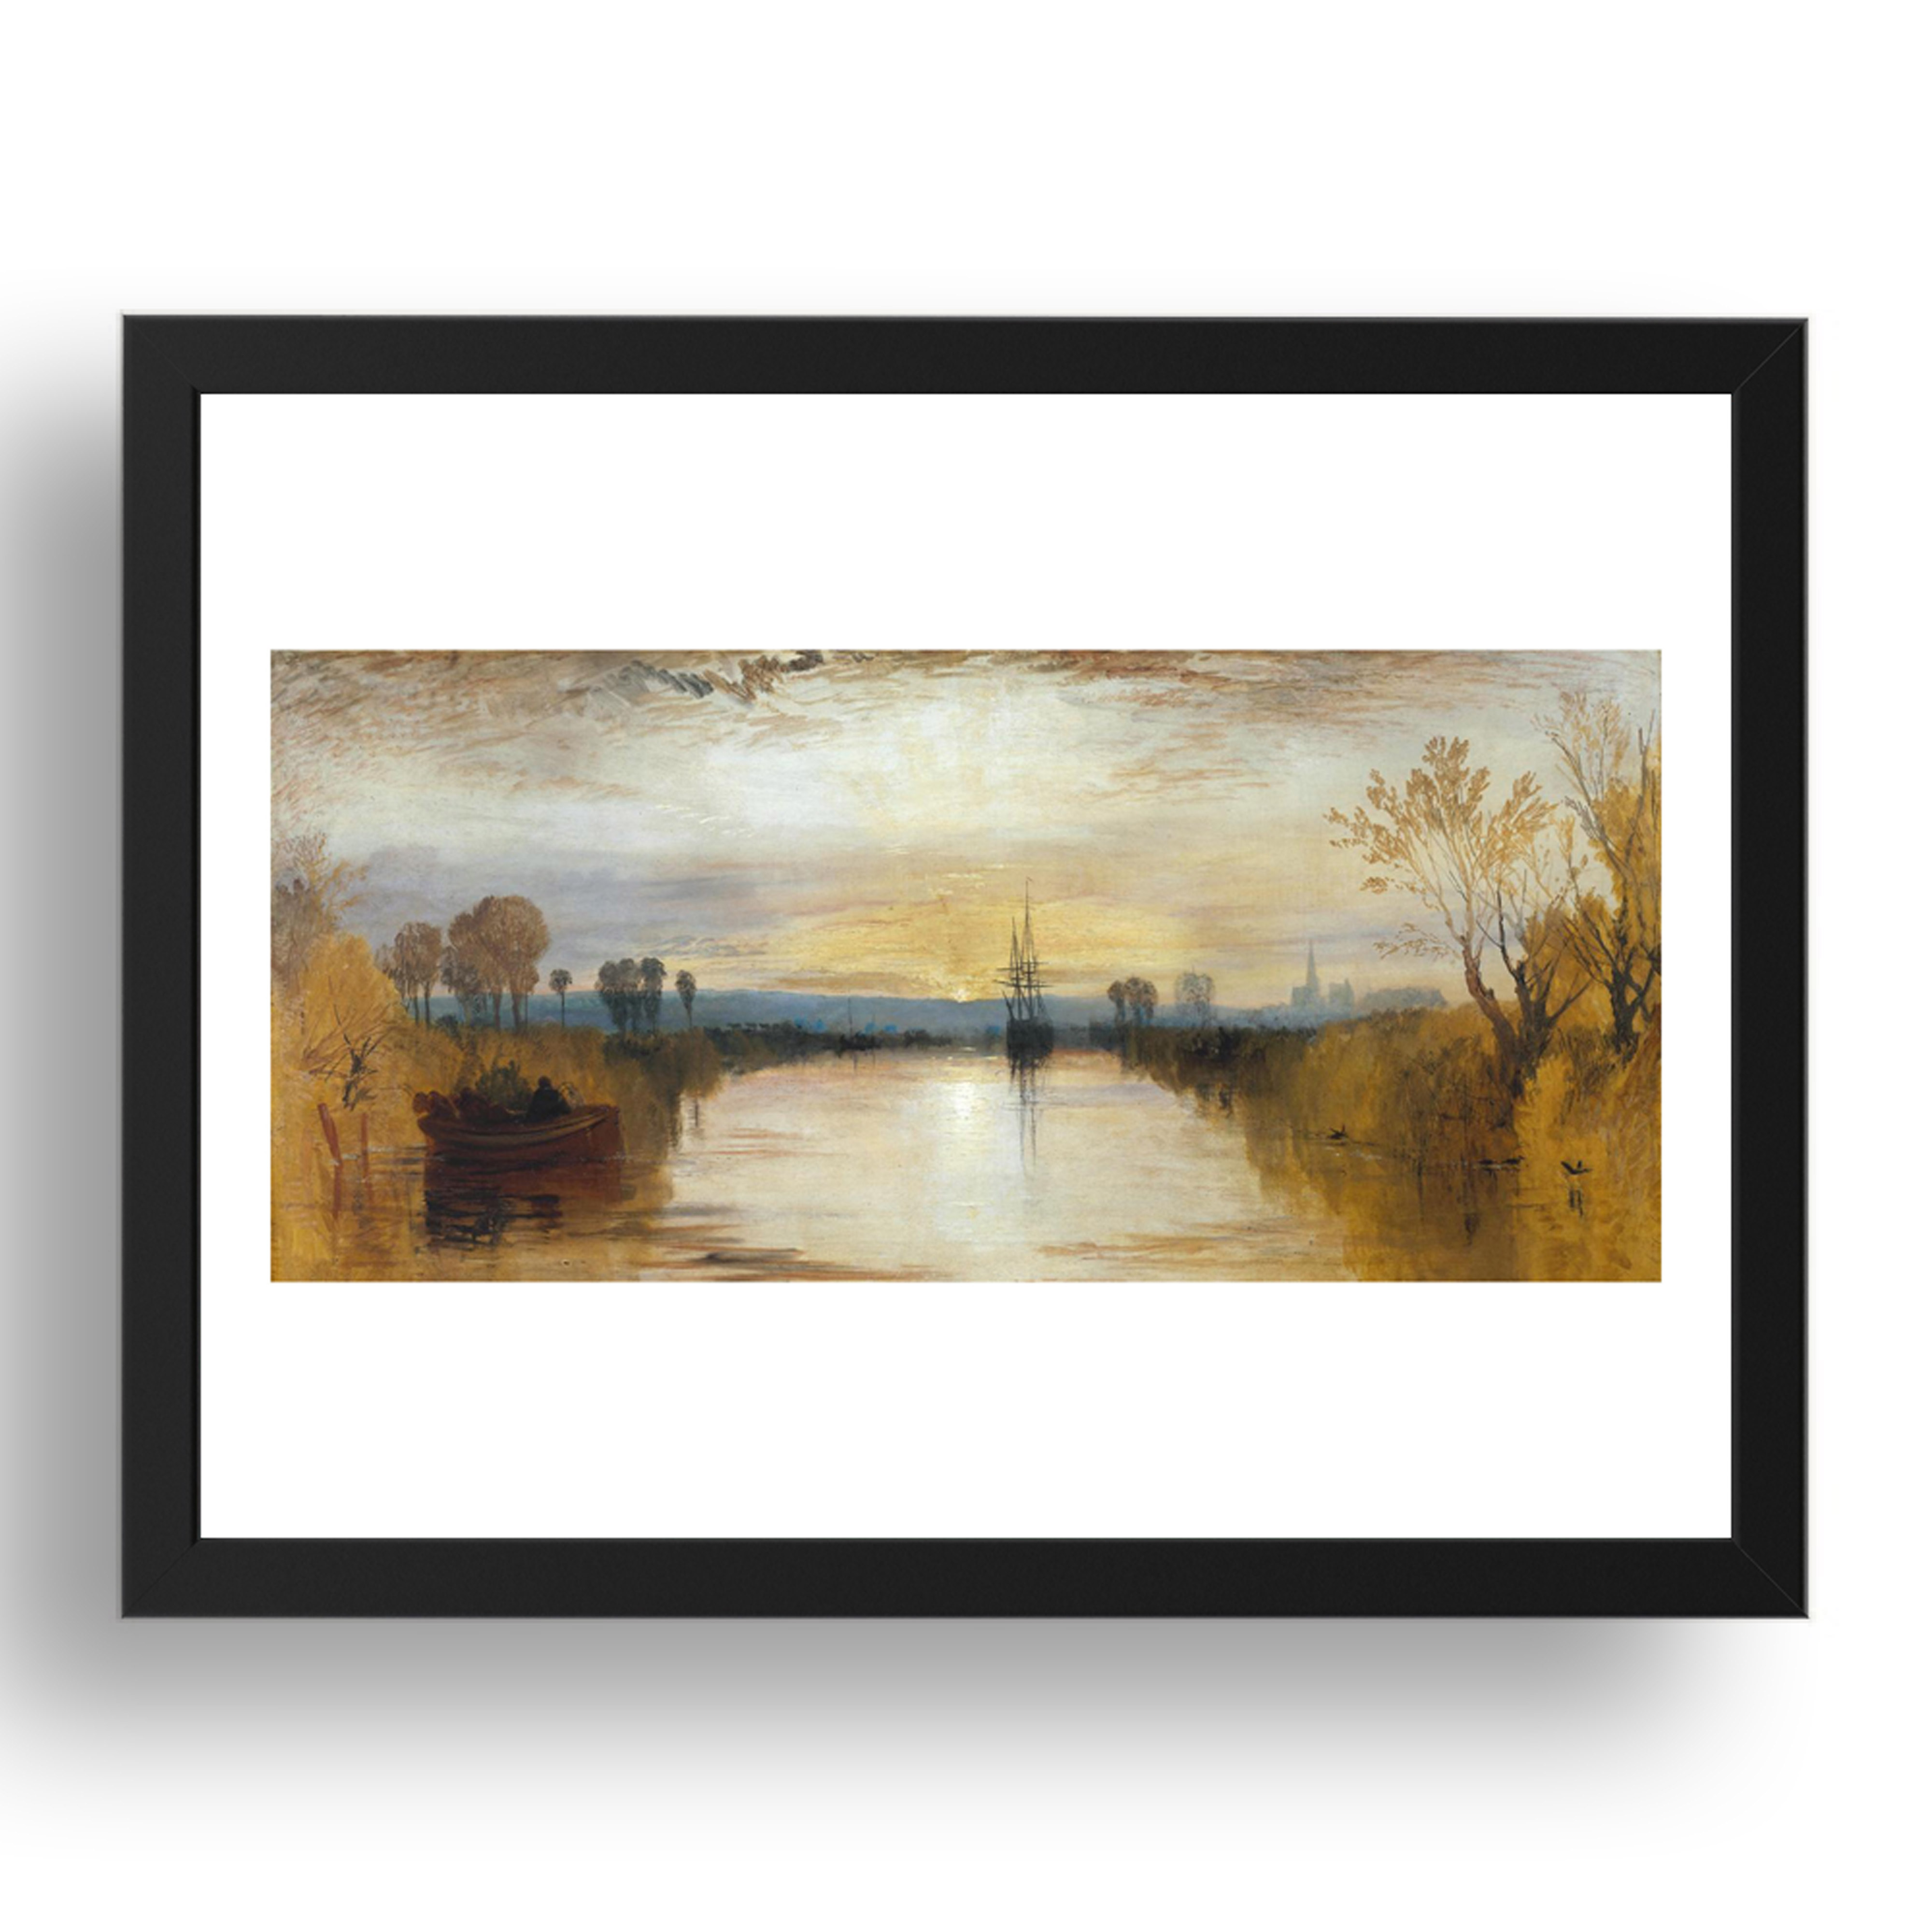 J. M. W. Turner - Chichester Canal [1828], A3 (17x13") Black Frame - Picture 1 of 1